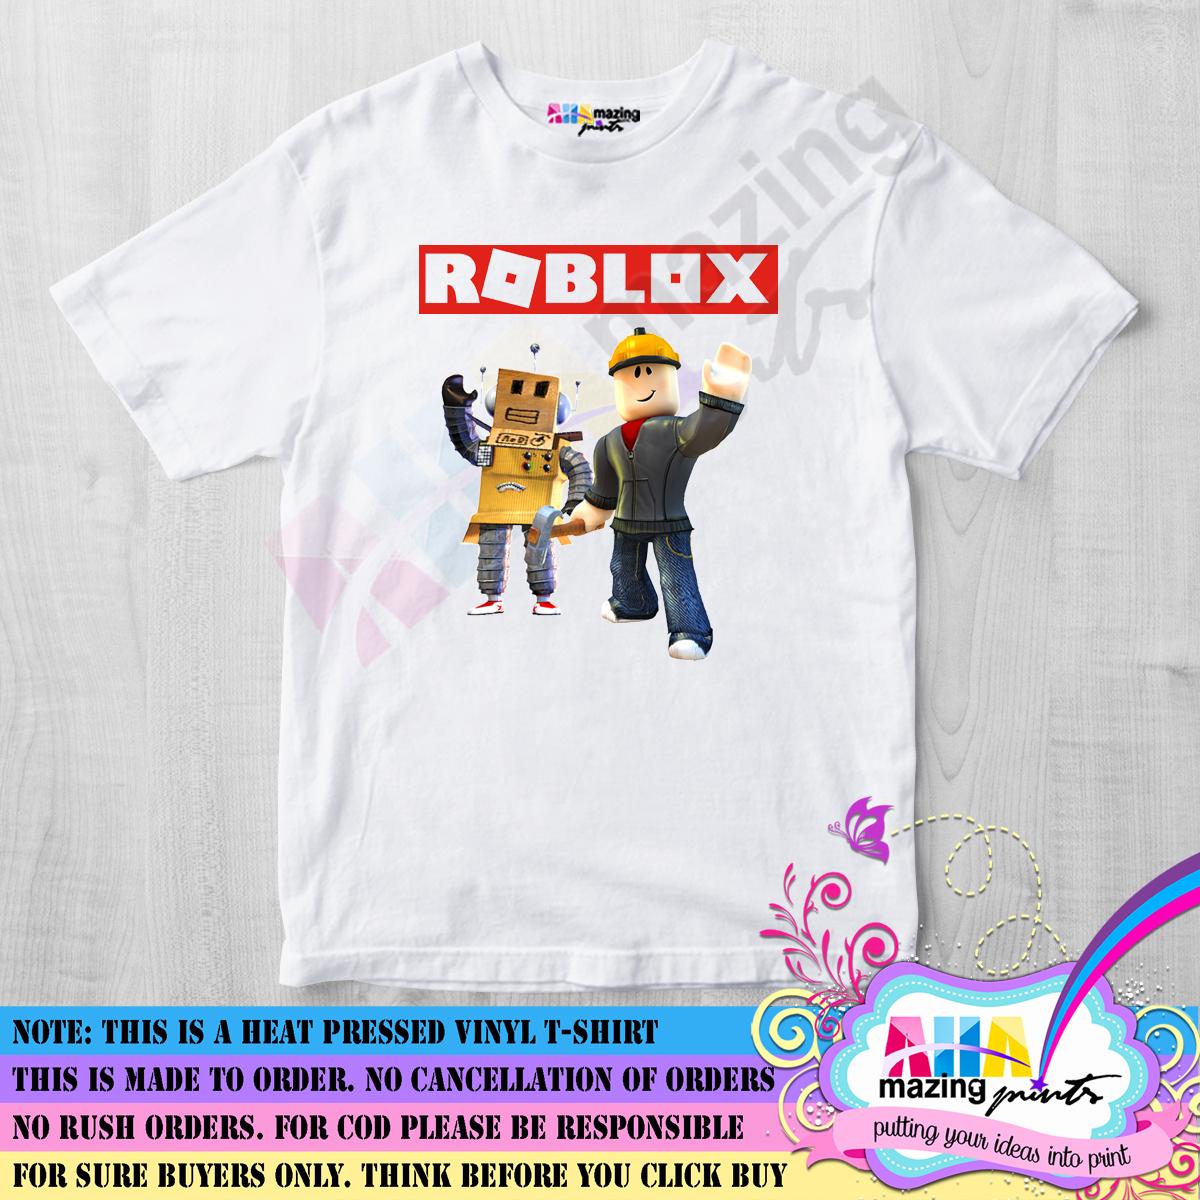 Kids Shirt Only Roblox Wonder Shirt For Little Boy Kids Fashion Top Boys Little Boys Cotton Statement Shirt Casual Custom Shirt Childrens Wear - roblox ideas for all dresses outfits for all ocassions